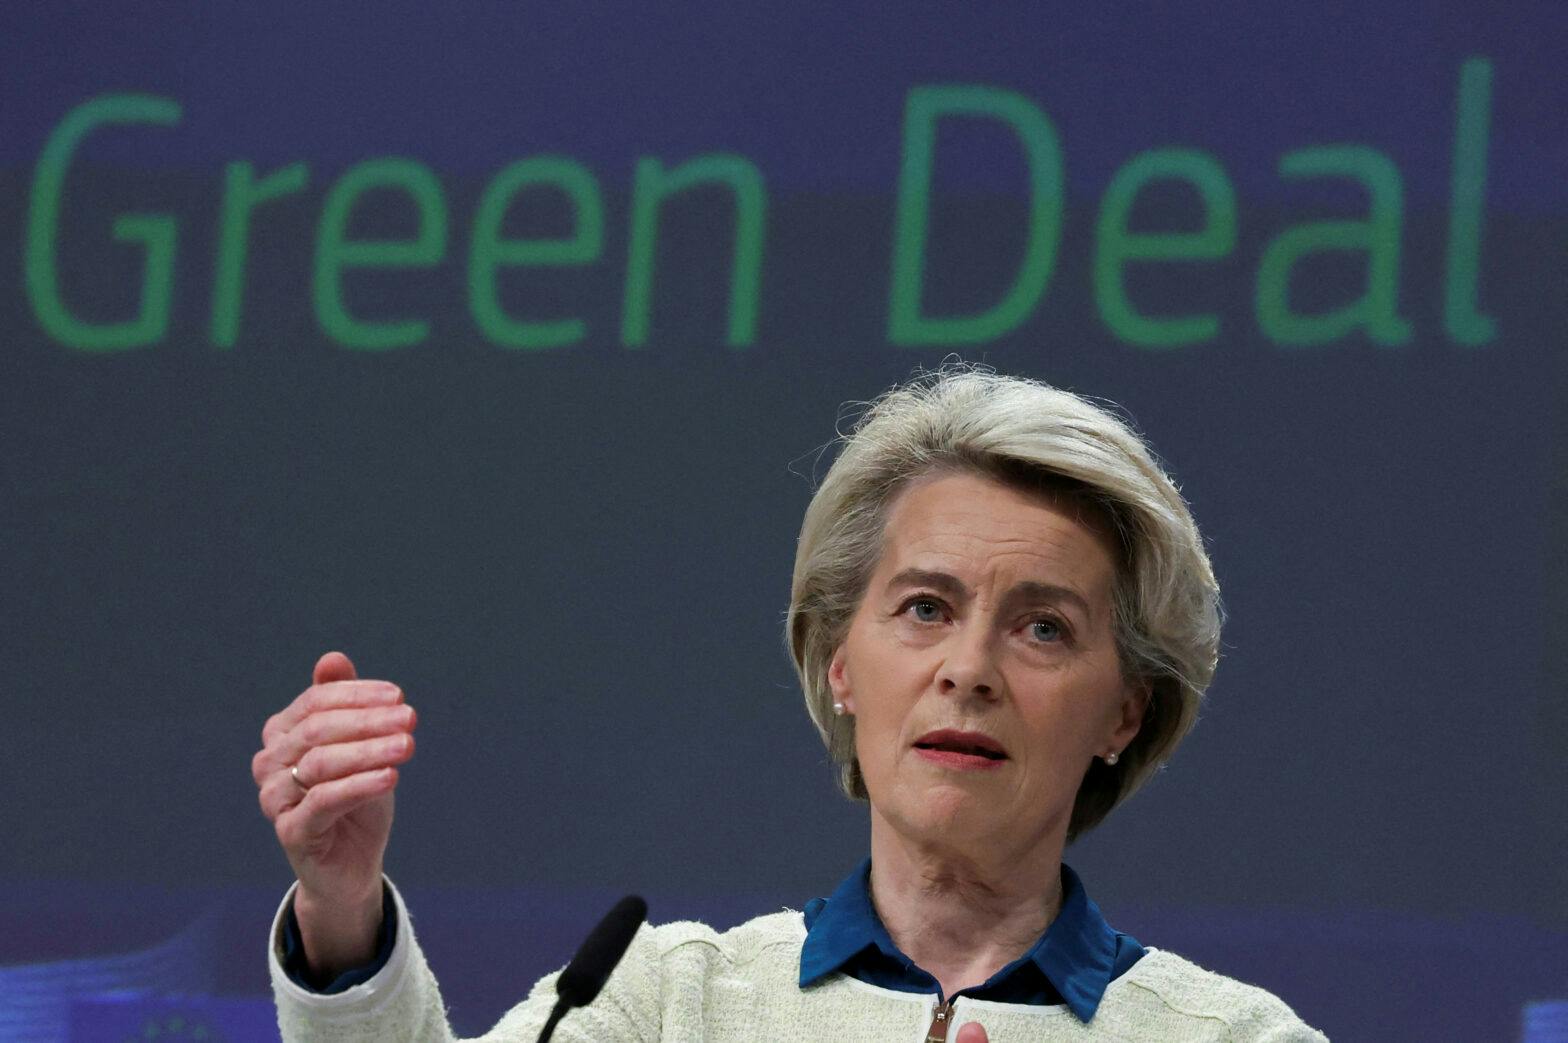 European Commission President Ursula presents a “communication” detailing the EU’s “Green Deal Industrial Plan” in Brussels